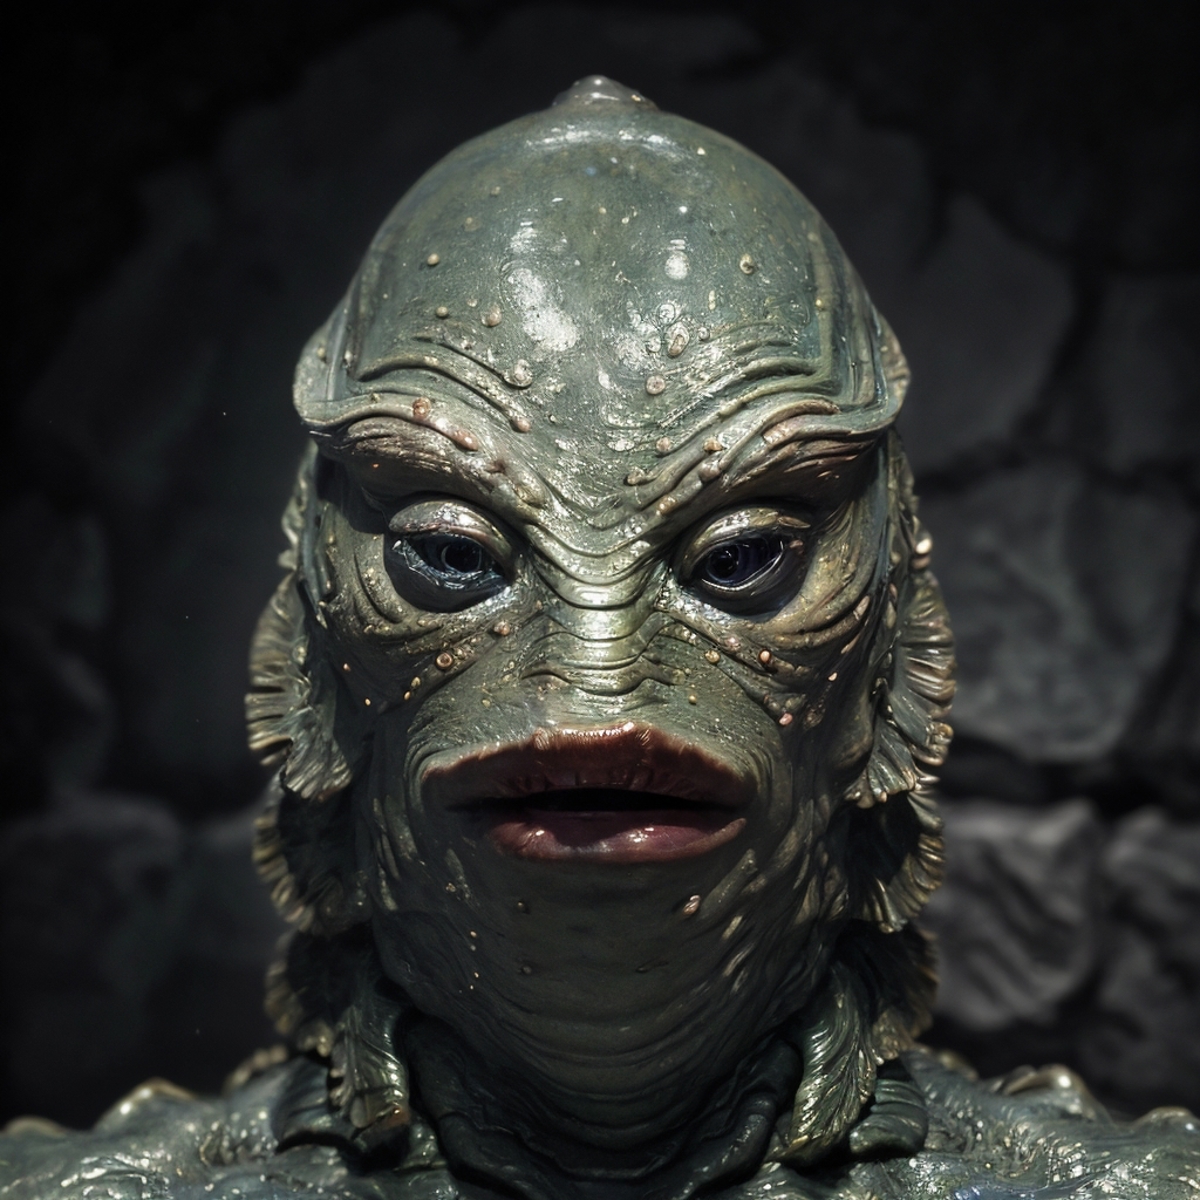 Gill-man image by jorz